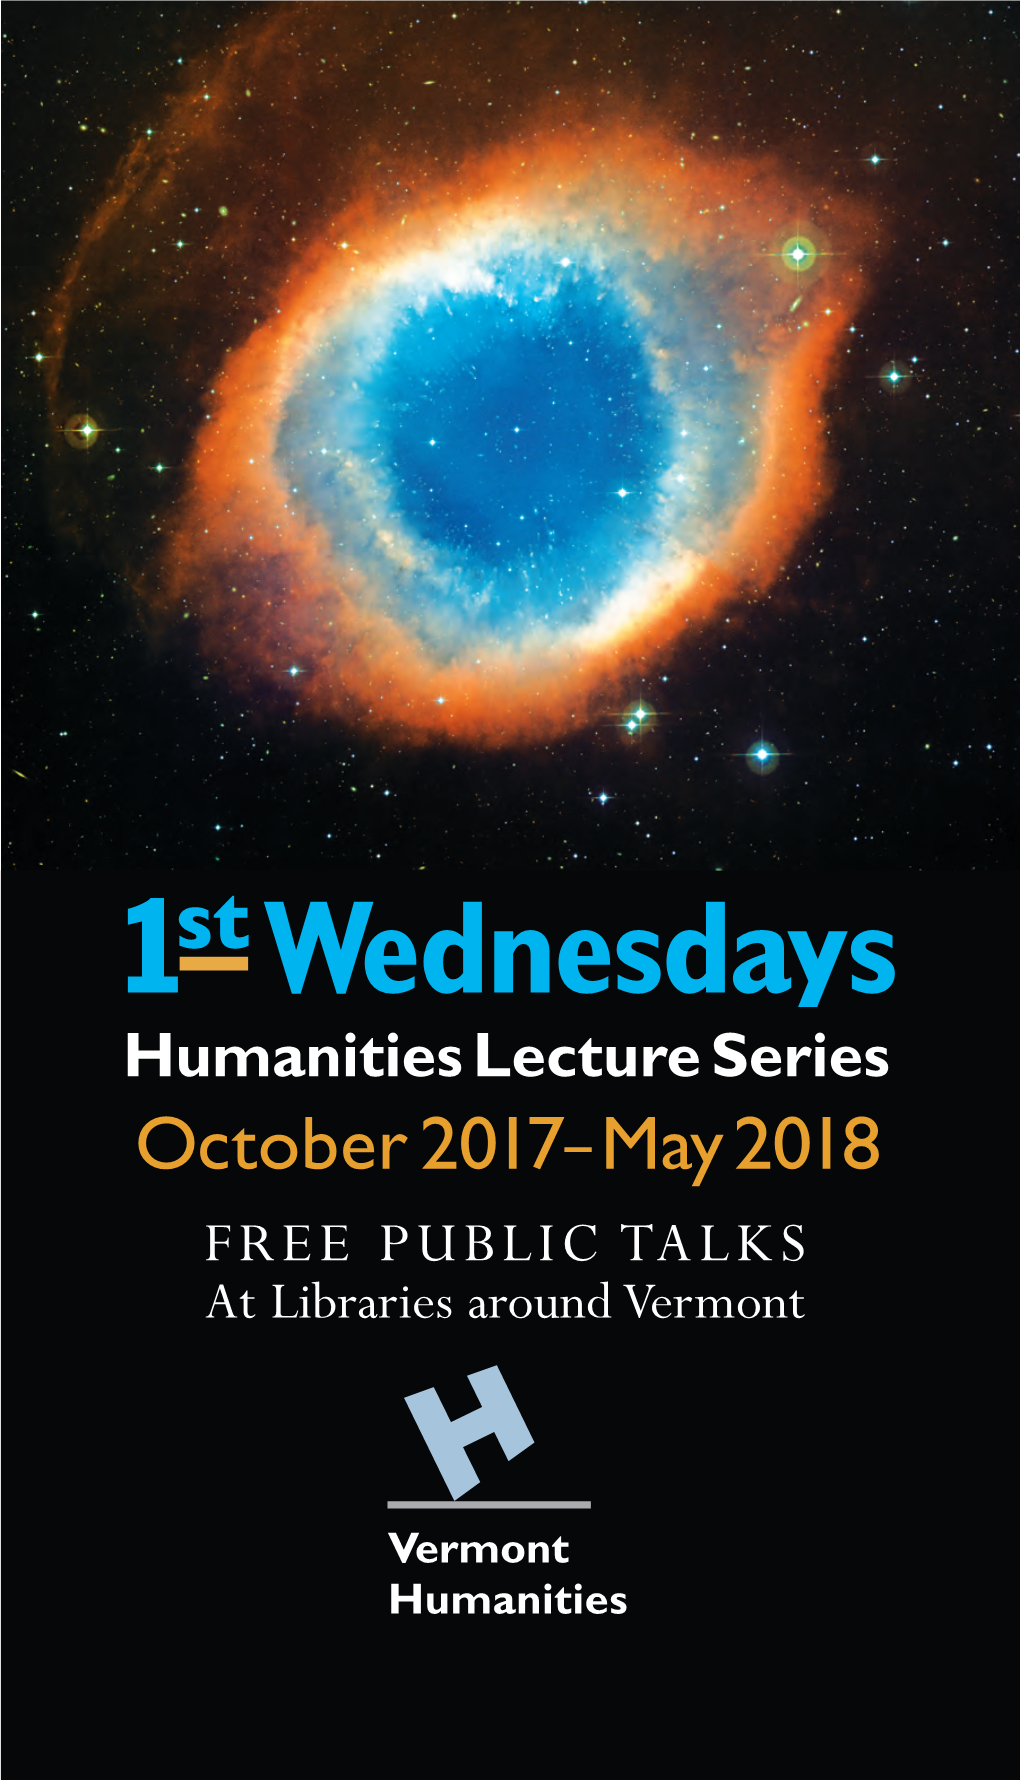 2017-2018 First Wednesdays Humanities Lecture Series